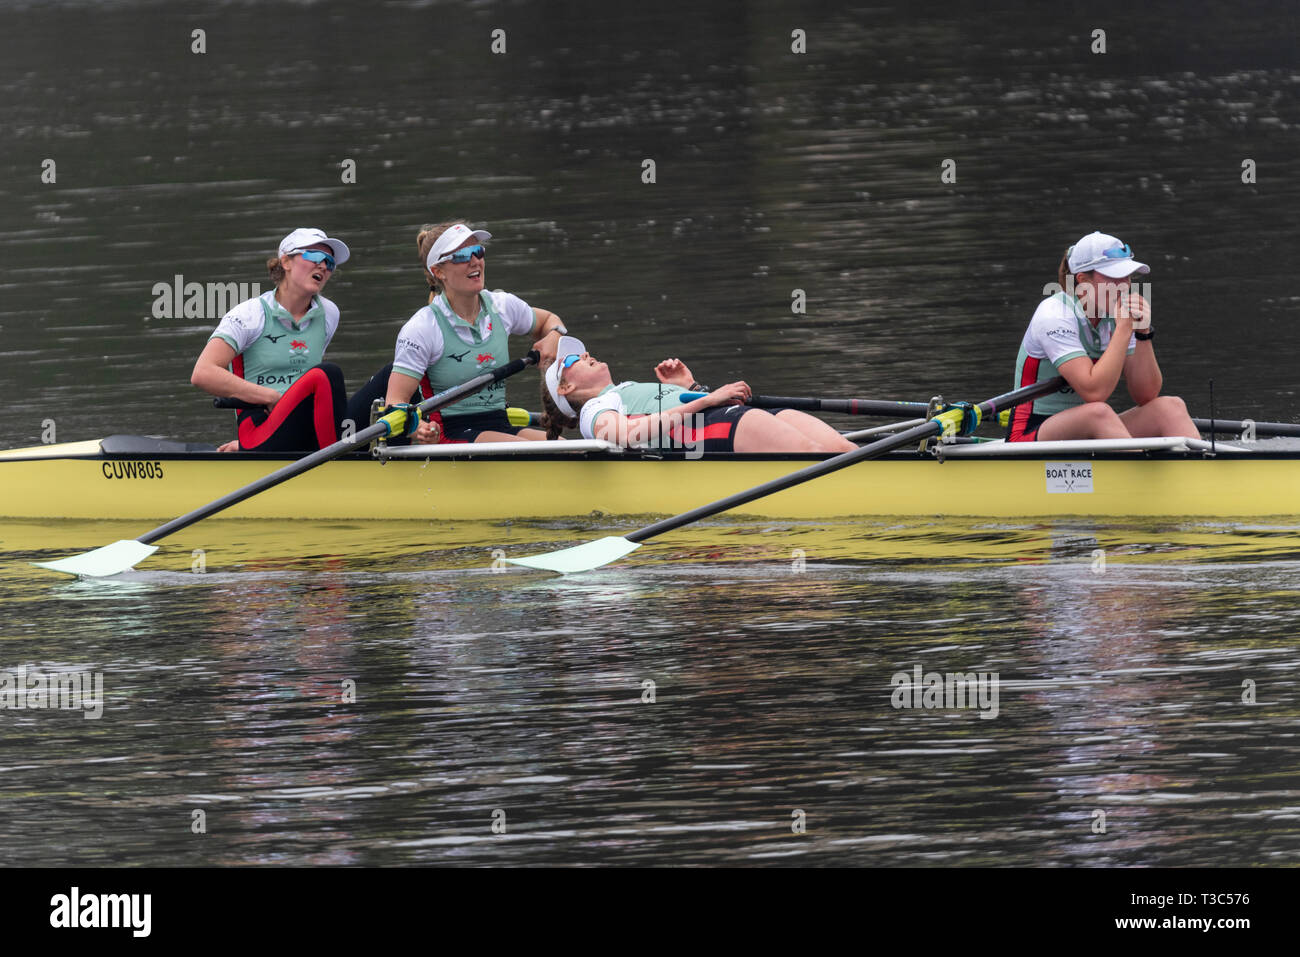 Women's Boat Race Cambridge winning boat team at the 2019 University Boat Race at the finish line Mortlake, London, UK. Exhausted Stock Photo